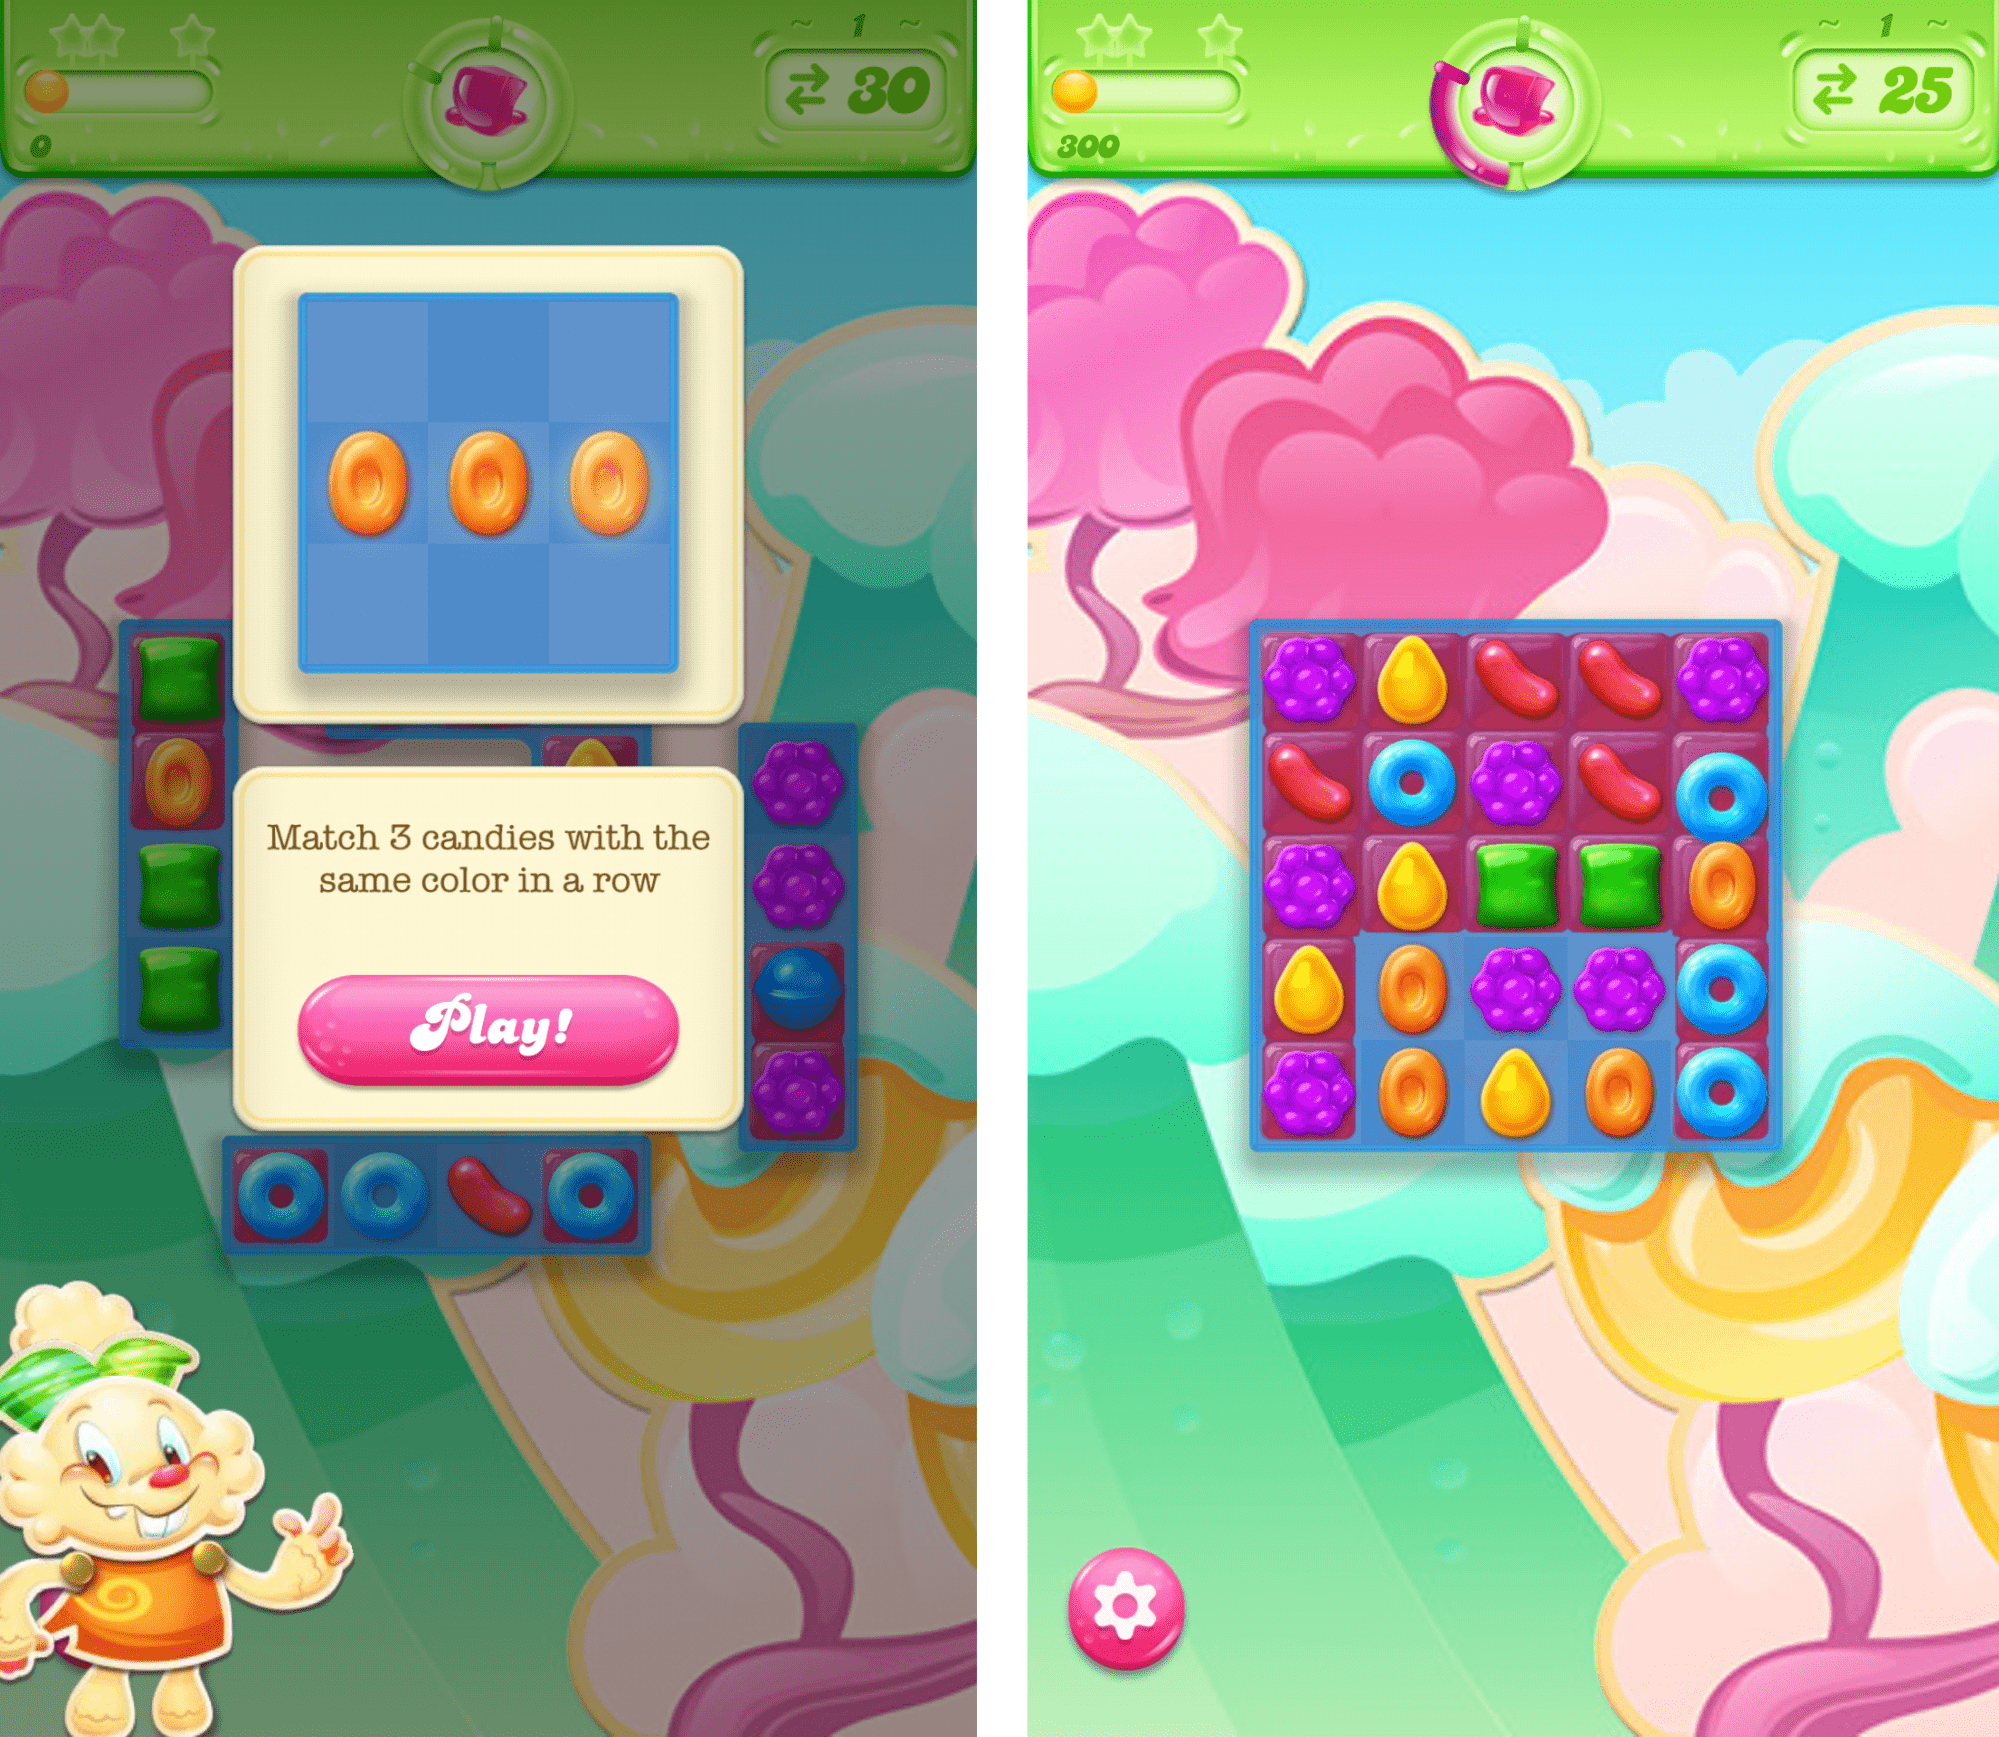 Mobile Engagement Analysis: Candy Crush